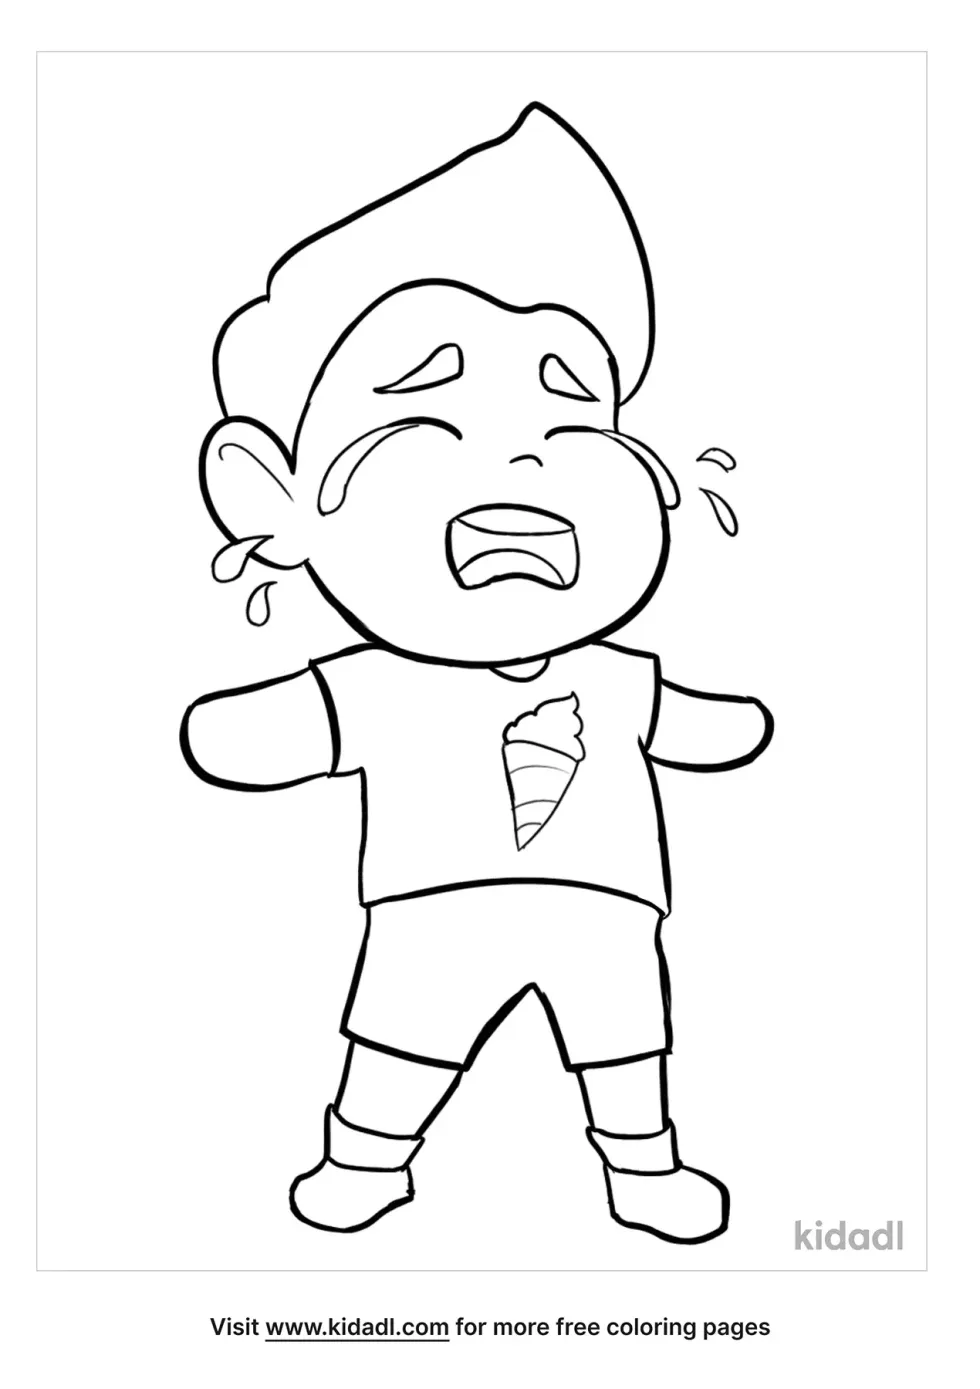 Crying Child Coloring Page